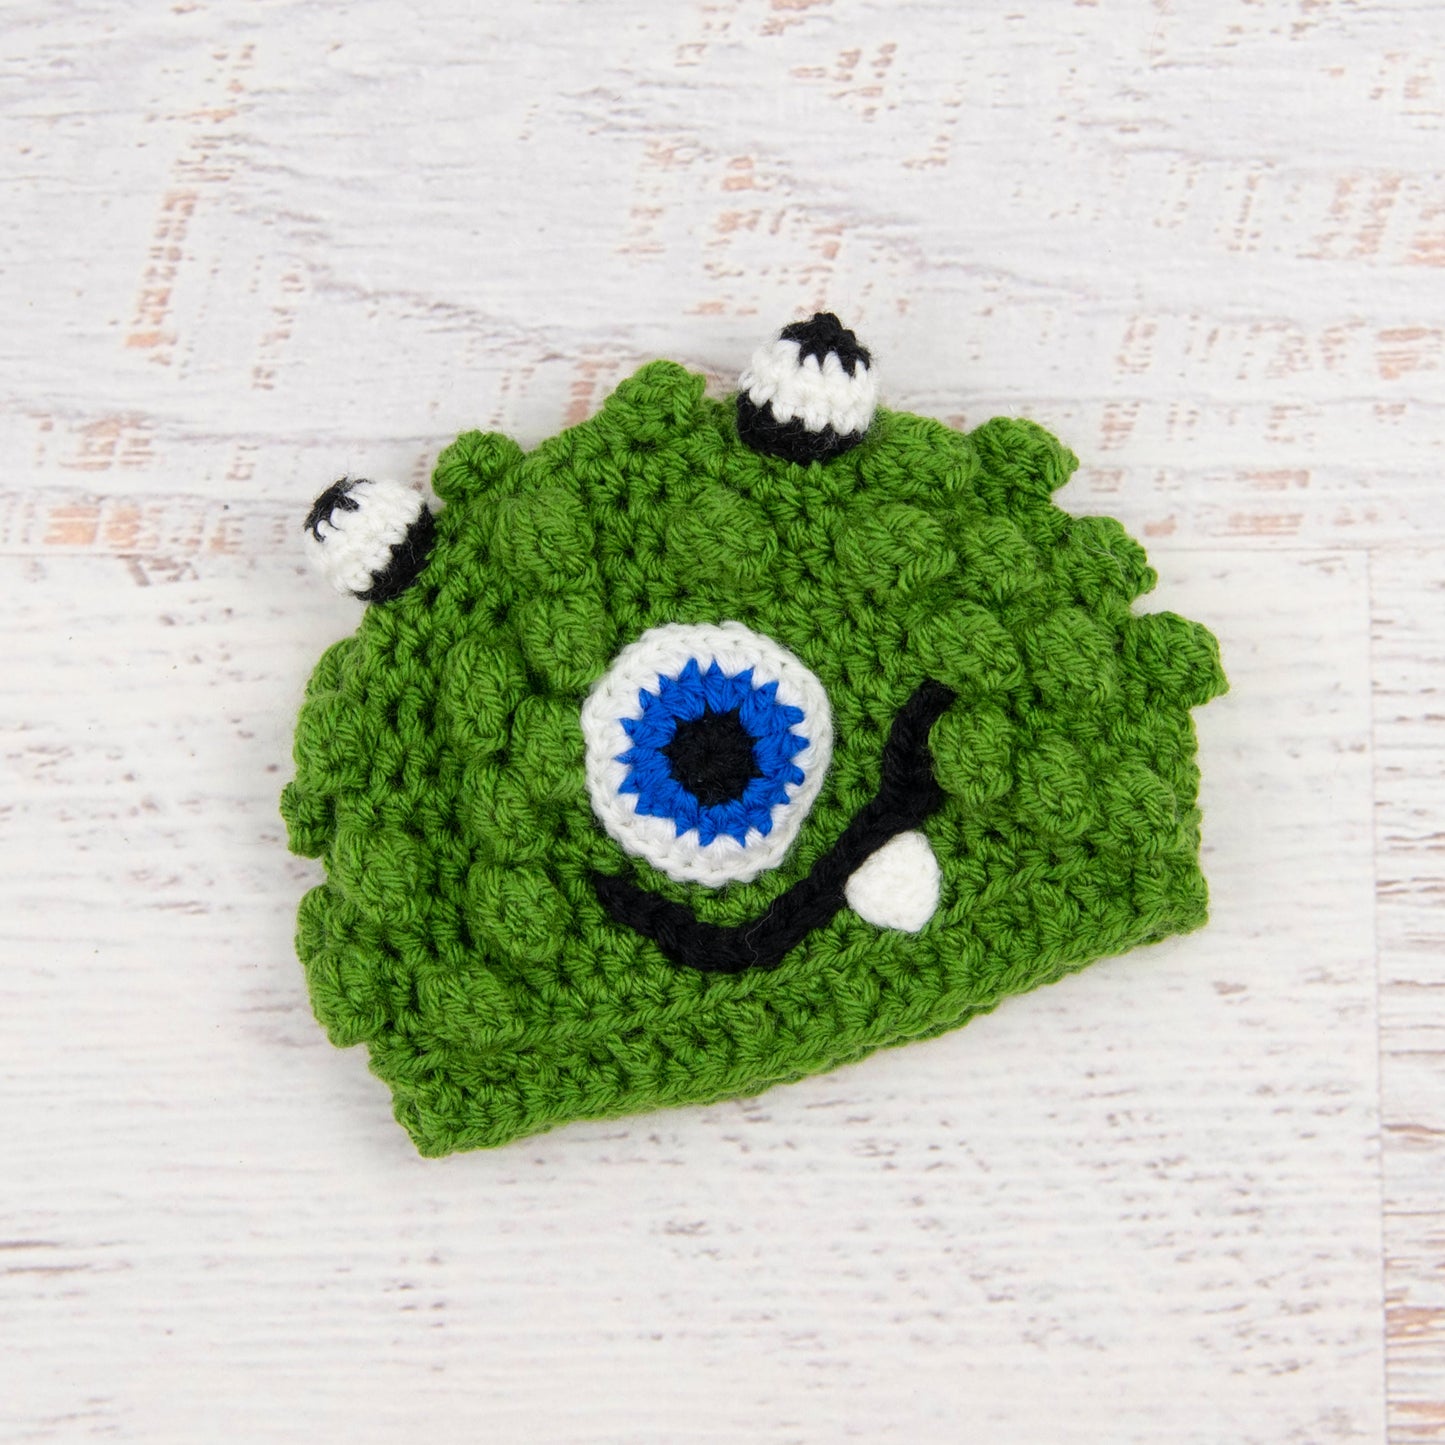 In-Stock 0-6 Month Little Monster in Kelly Green with Electric Blue Eye